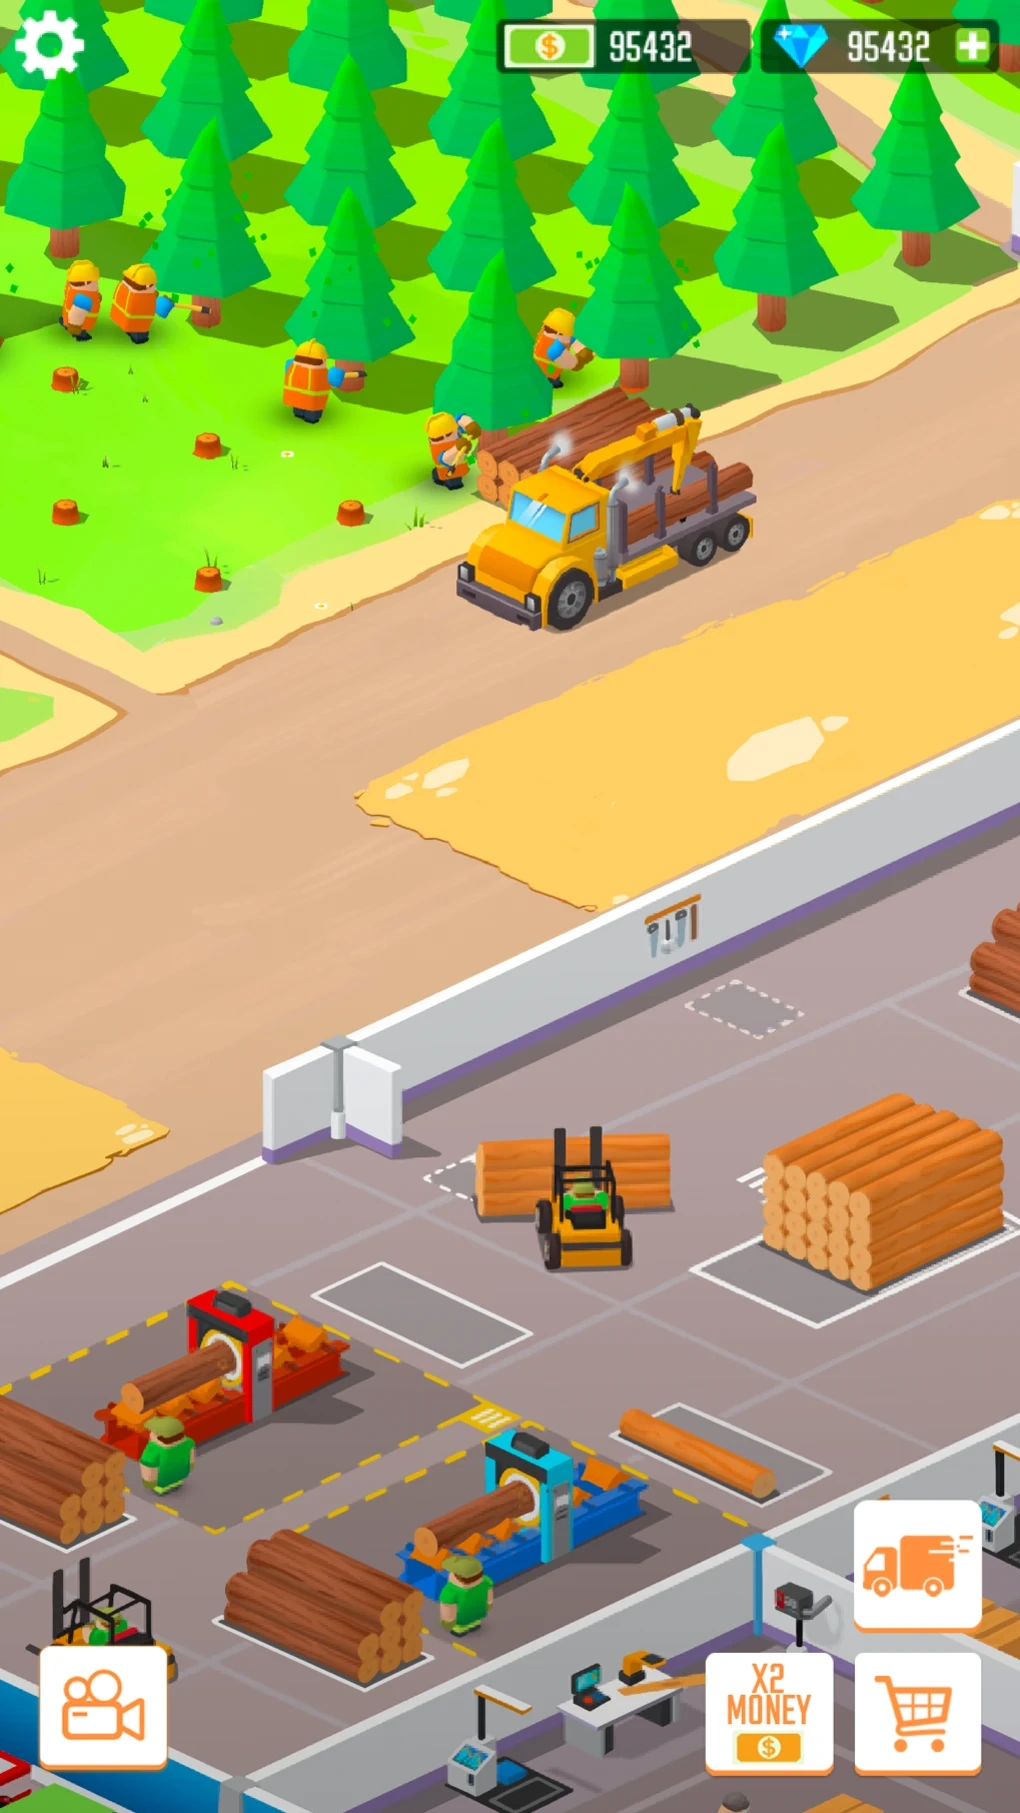 In the realm of free-to-play mobile games, Idle Lumber Empire stands out with its strategic depth and engaging gameplay.